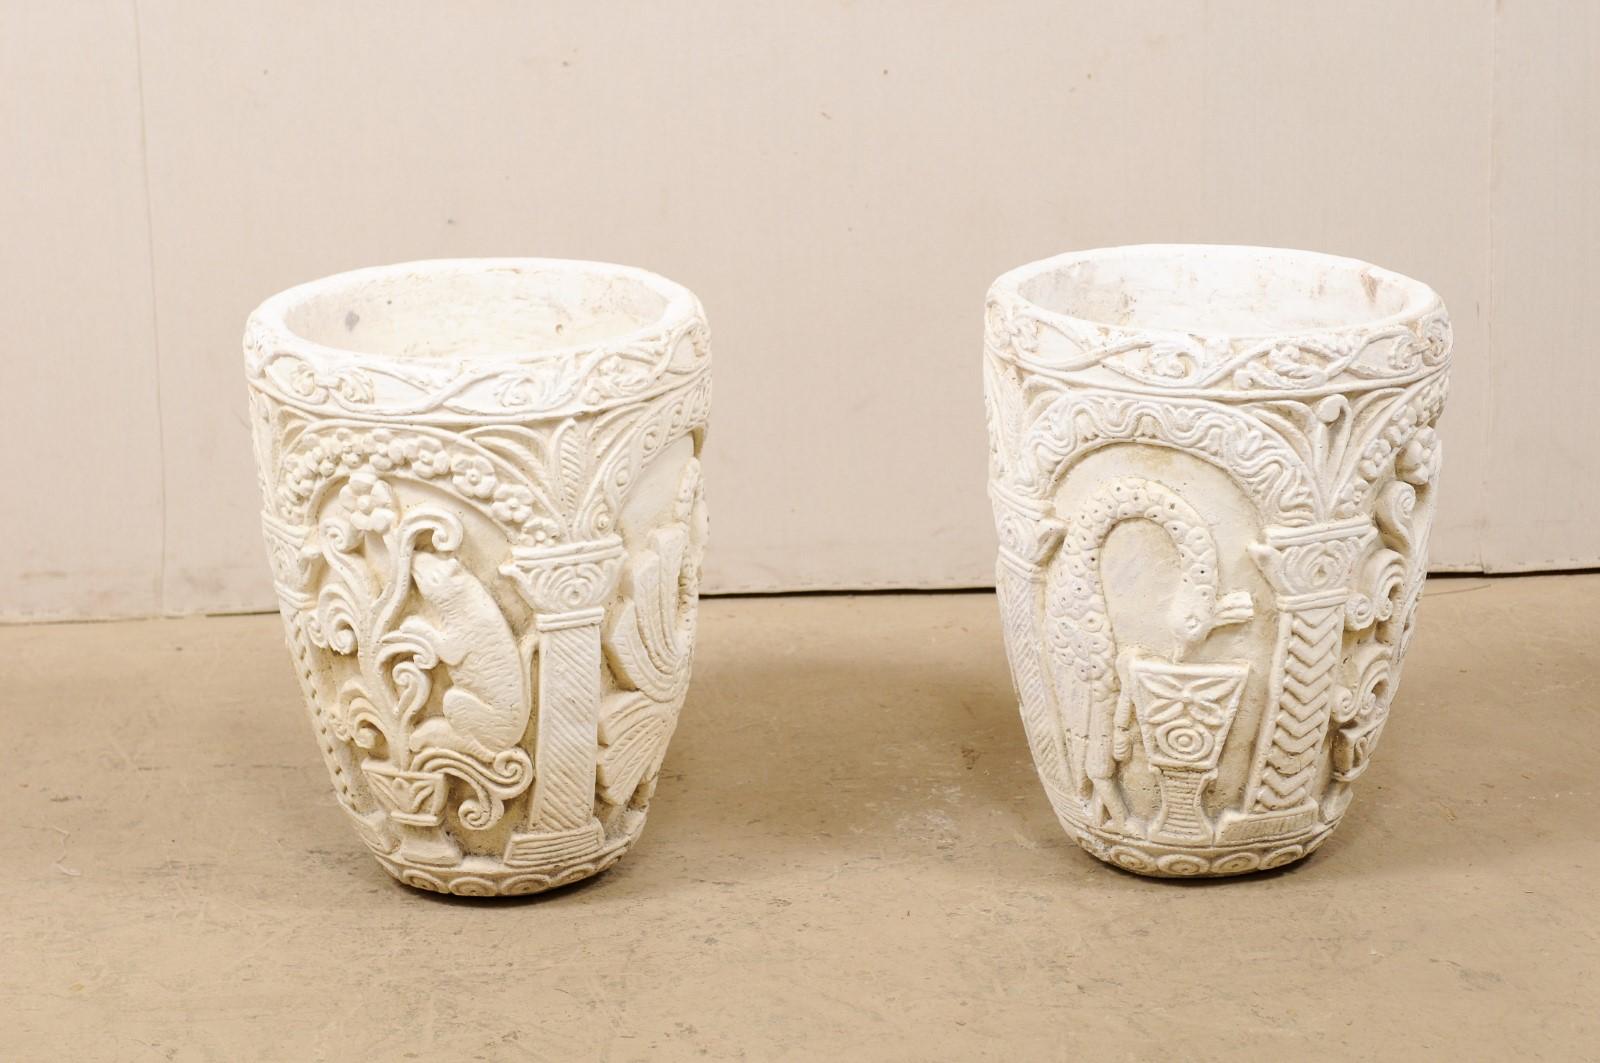 Cast Stone Pair of Mizner-Style Richly Decorated Cast-Stone Planters, 2+ Ft Tall